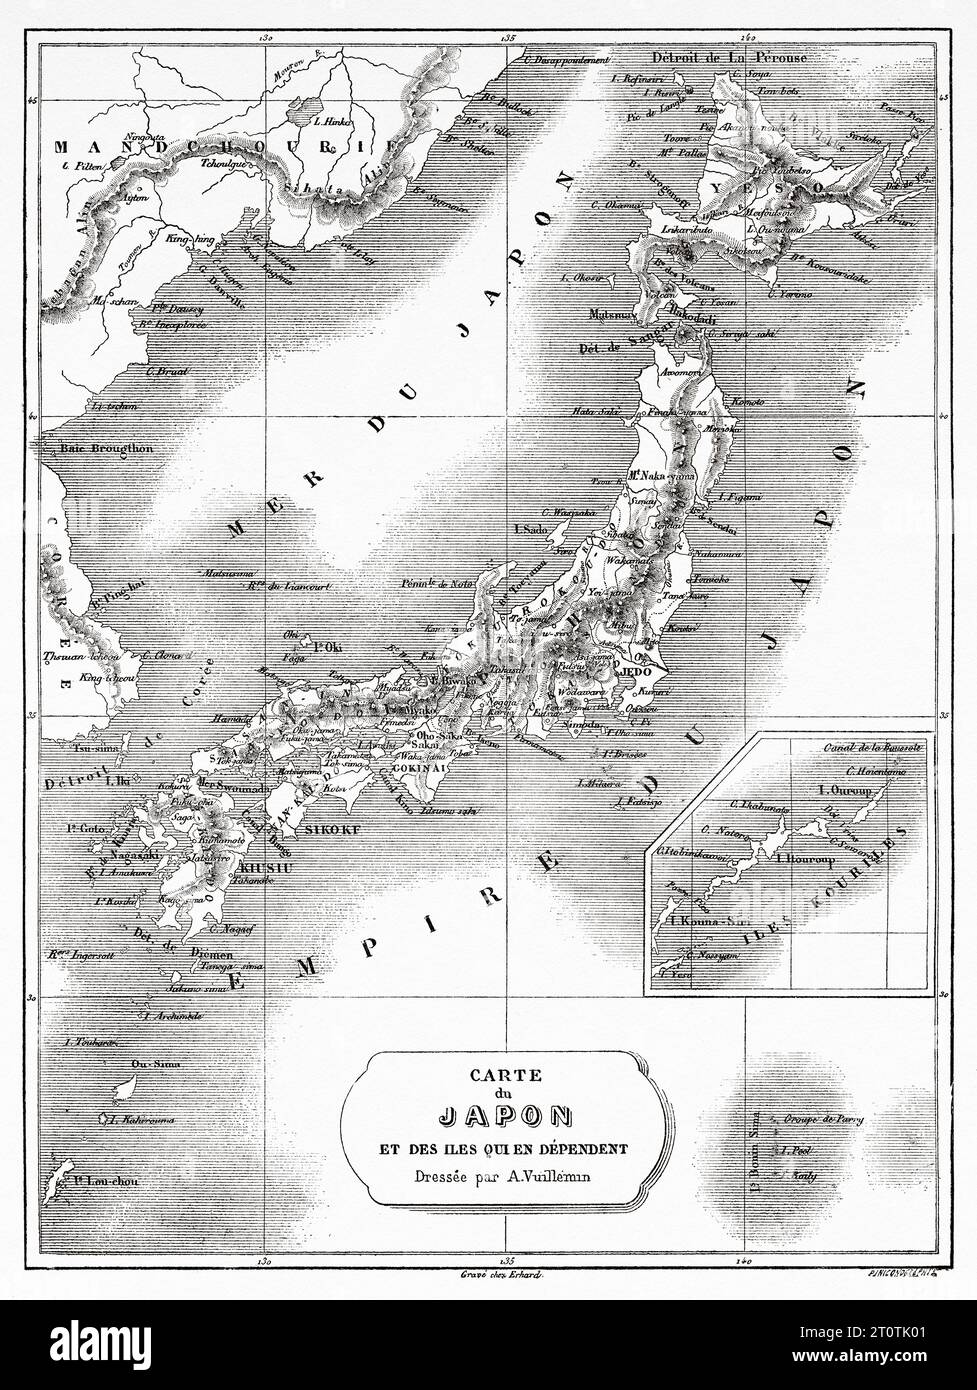 Old map of Japan and its dependent islands, Japan, Asia. Travels in China and Japan by the Marquis Alfred de Moges 1857 - 1858. Old 19th century engraving from Le Tour du Monde 1860 Stock Photo